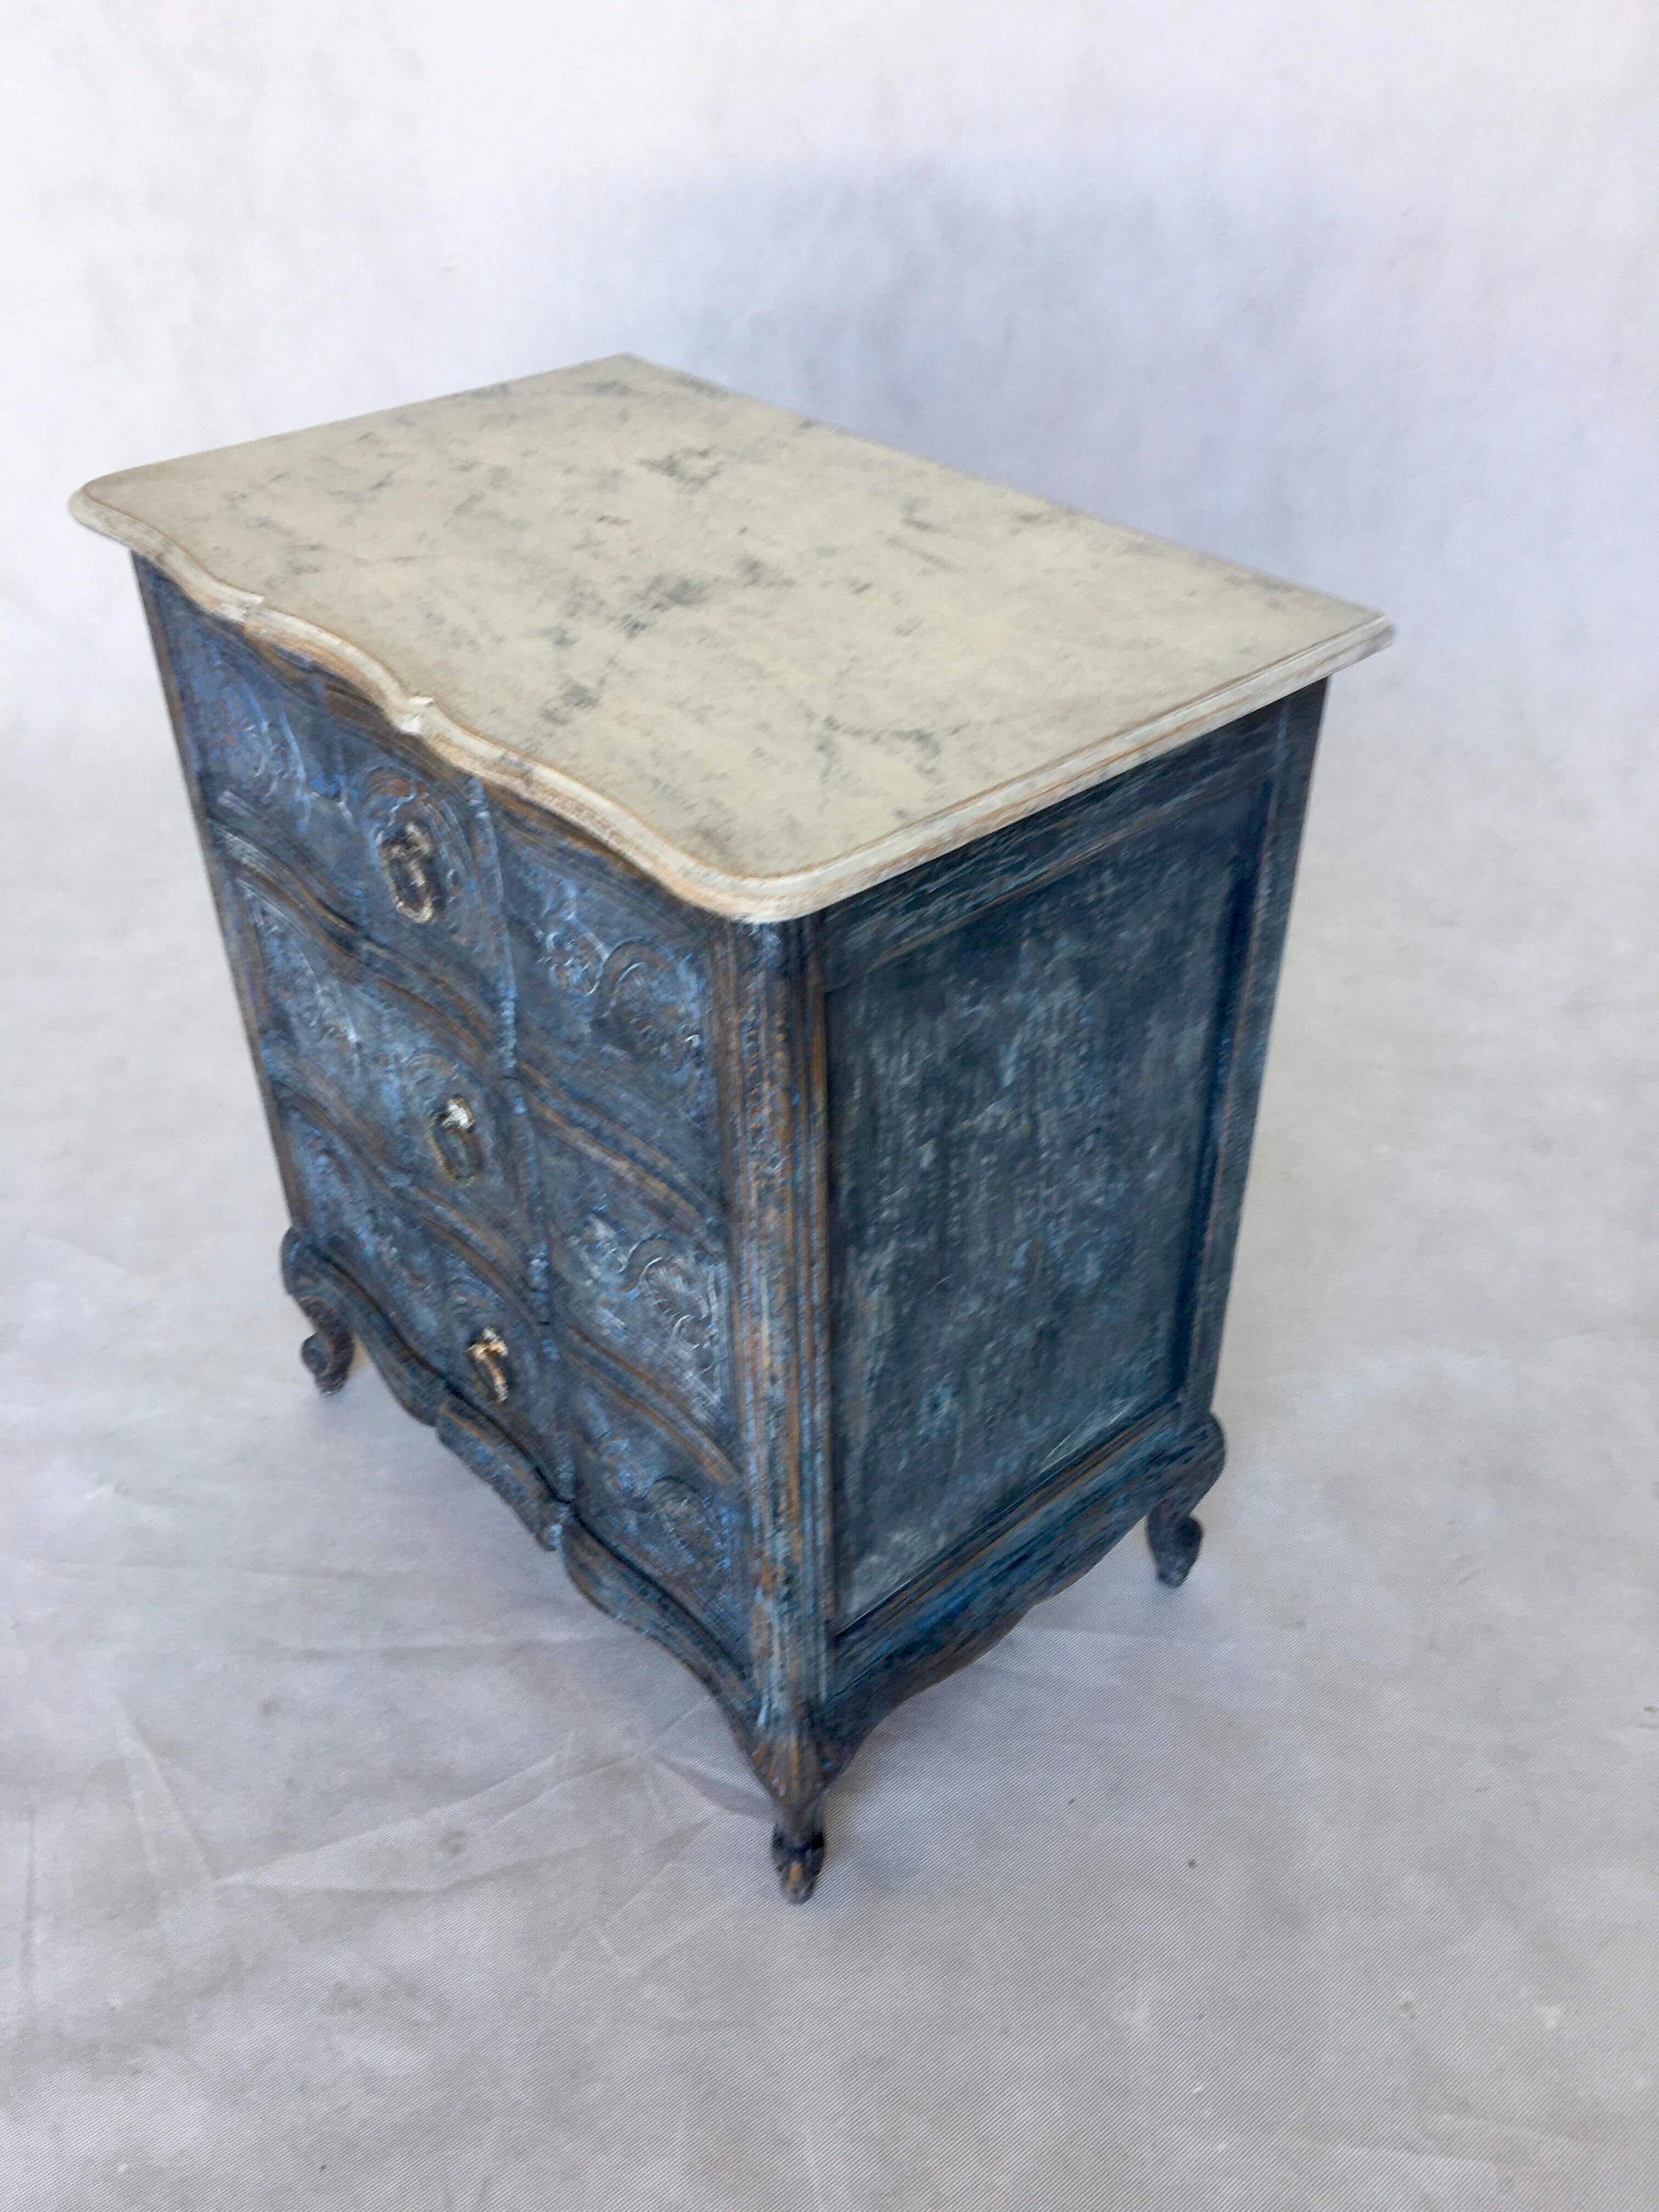 This Swedish Rococo style dresser features embellished drawers in dark blue. The top of the dresser is painted marble.
  